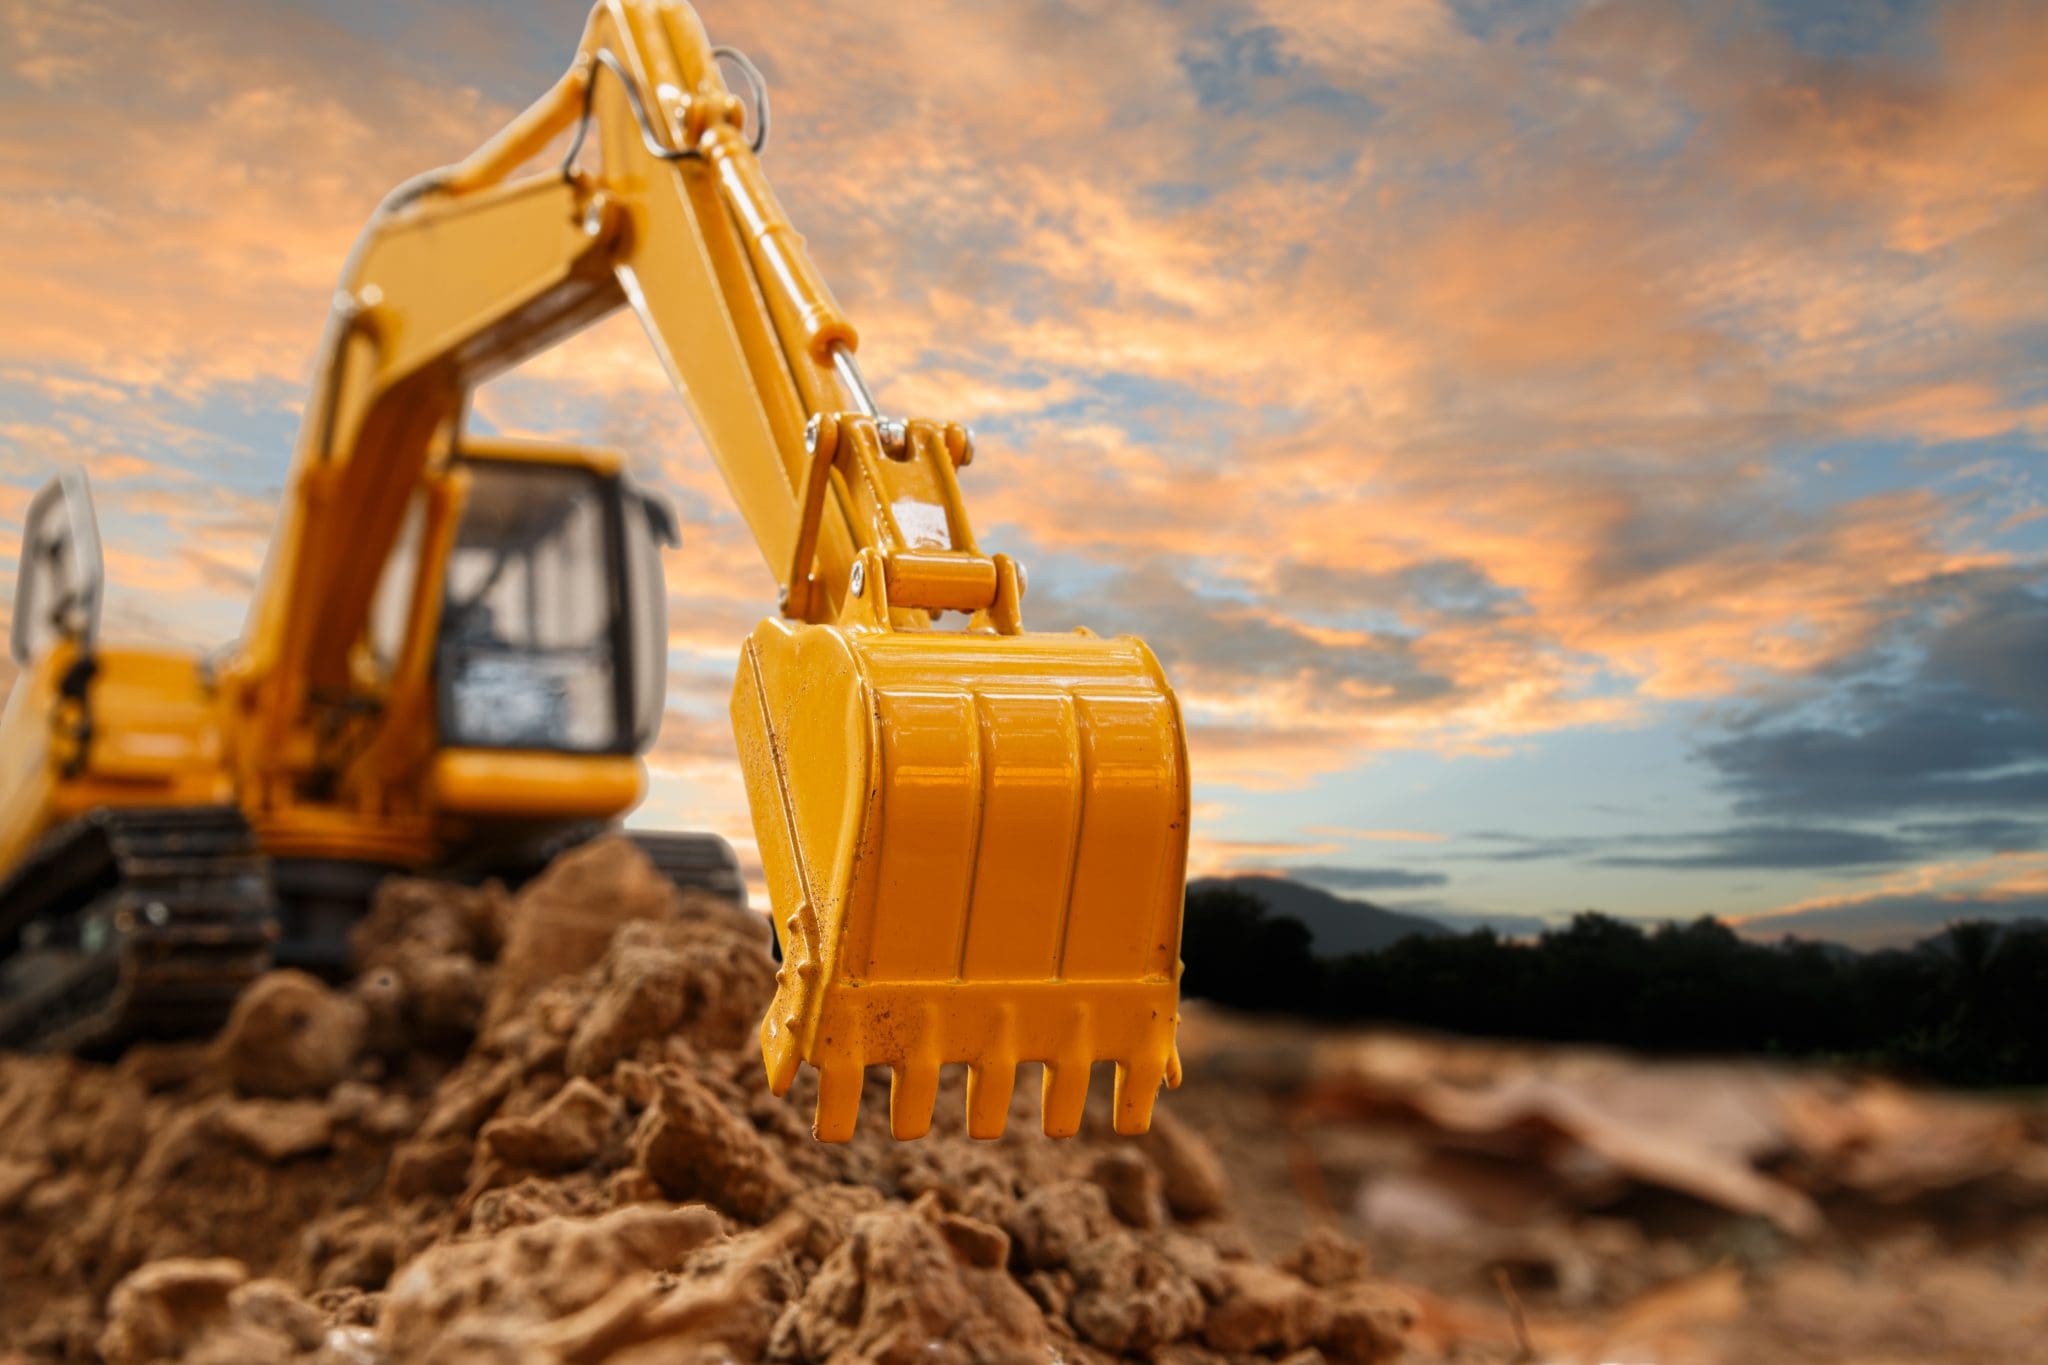 What to Consider When Choosing the Right Excavator for the Job